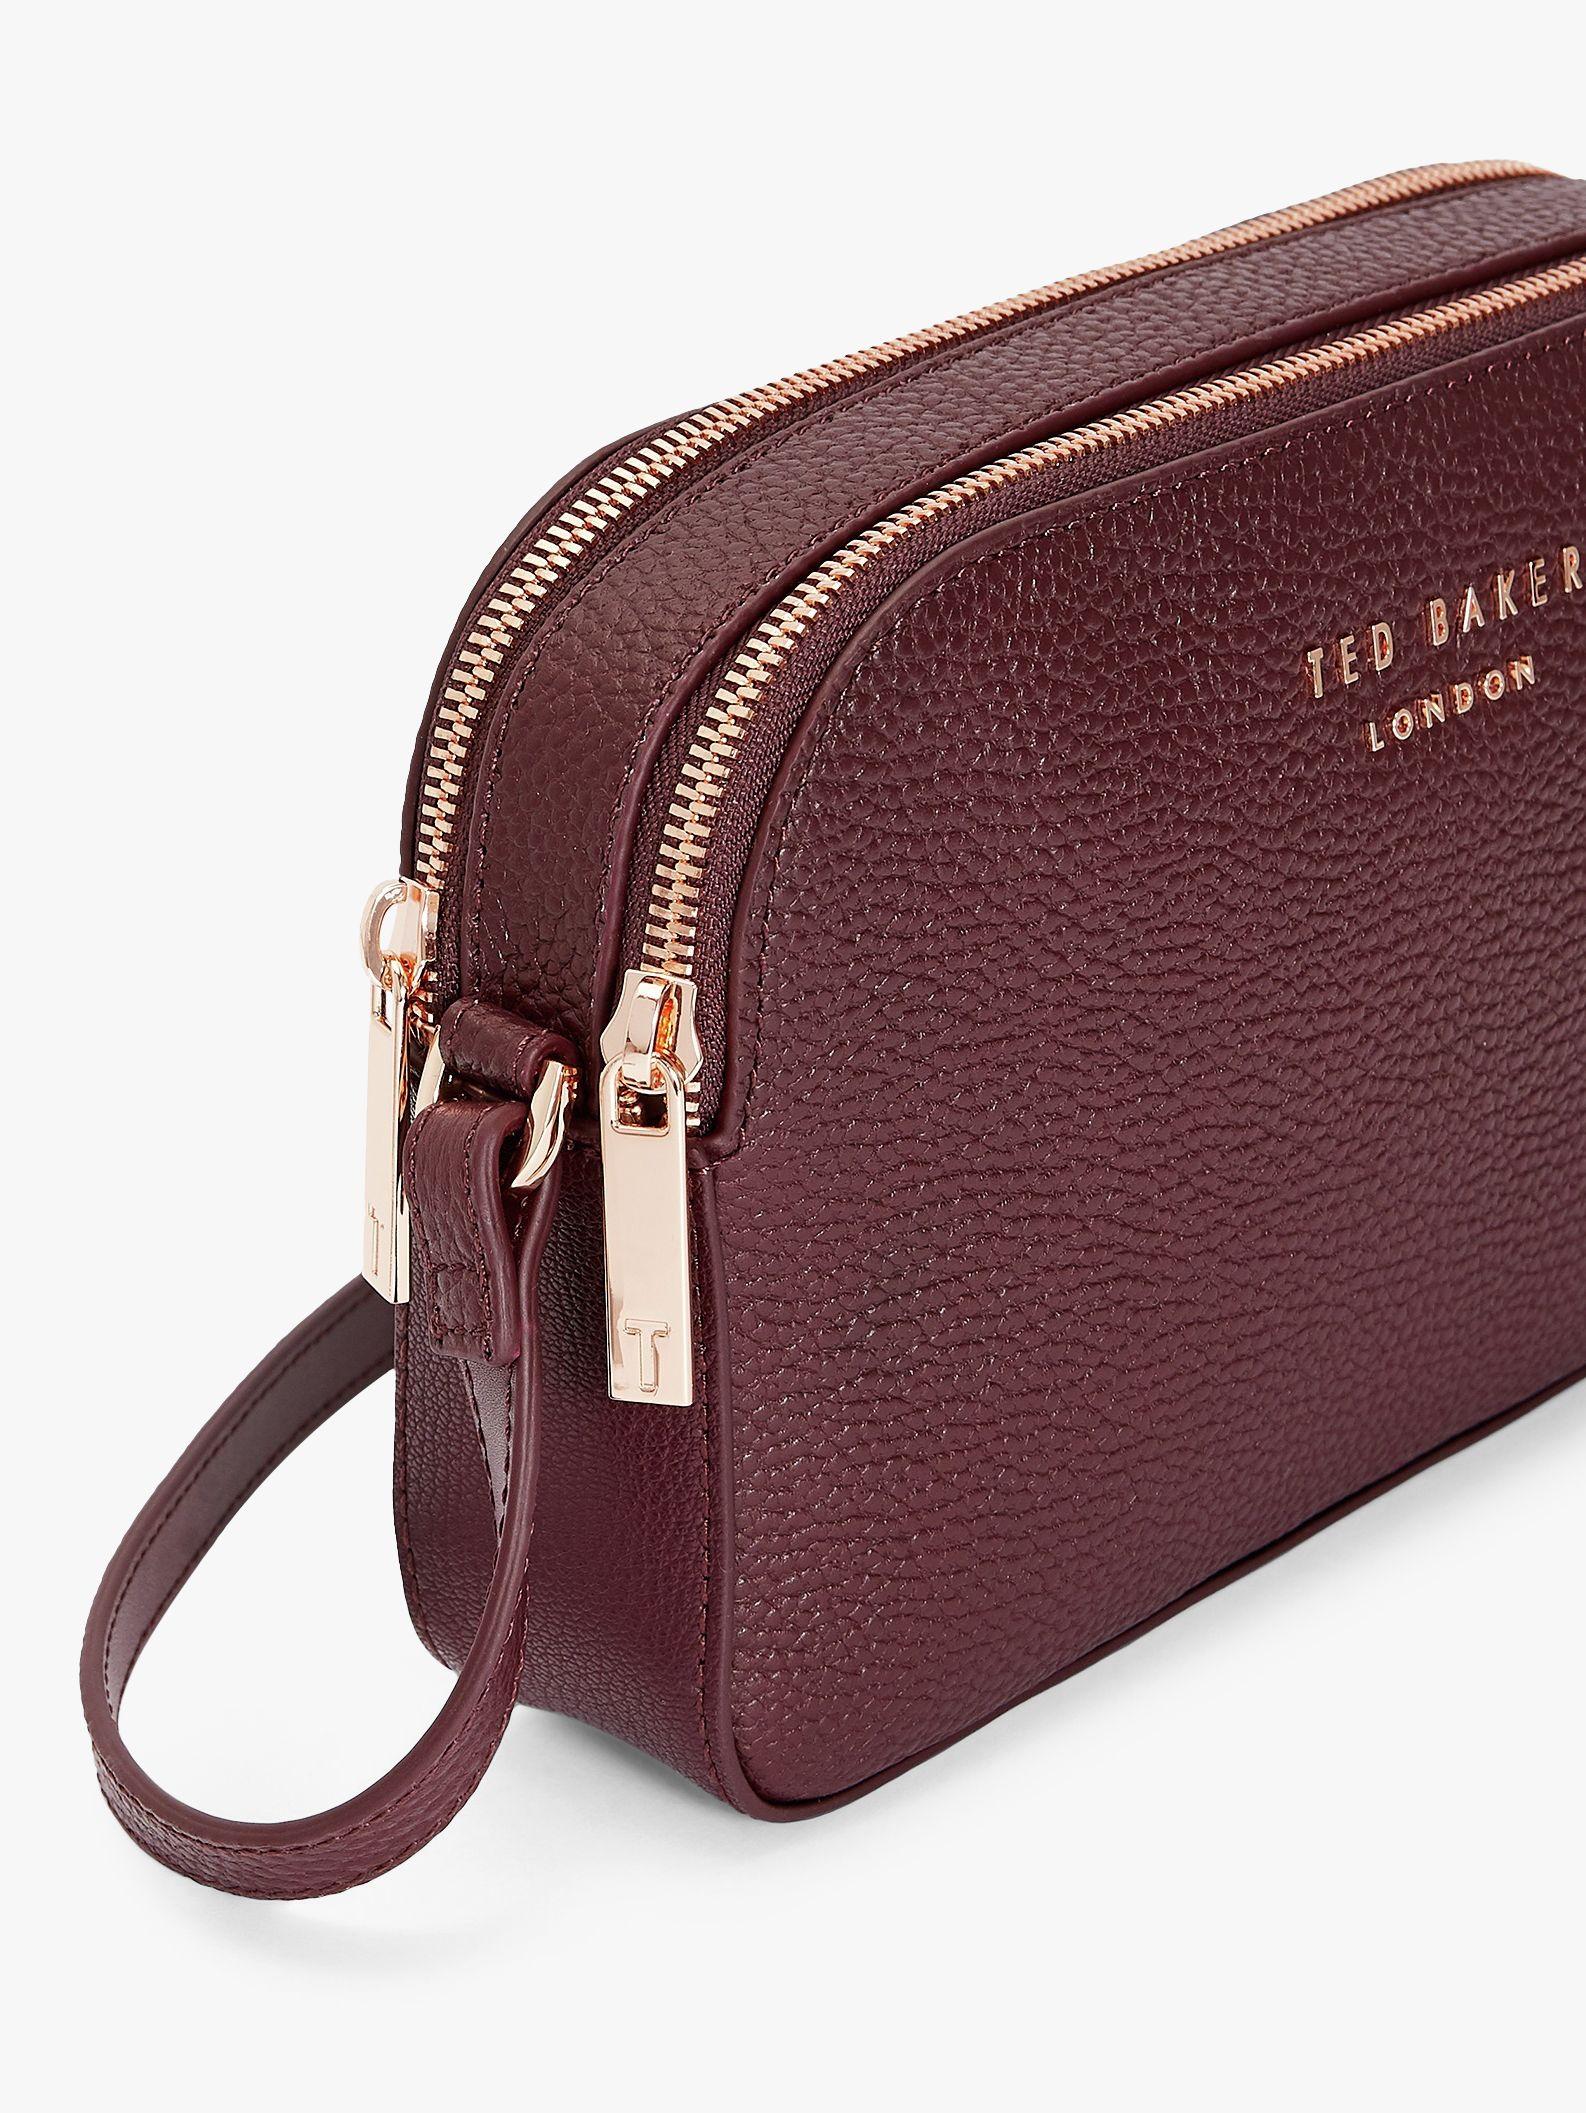 Ted Baker Daisi Leather Camera Bag in Red Bordeaux (Red) - Lyst